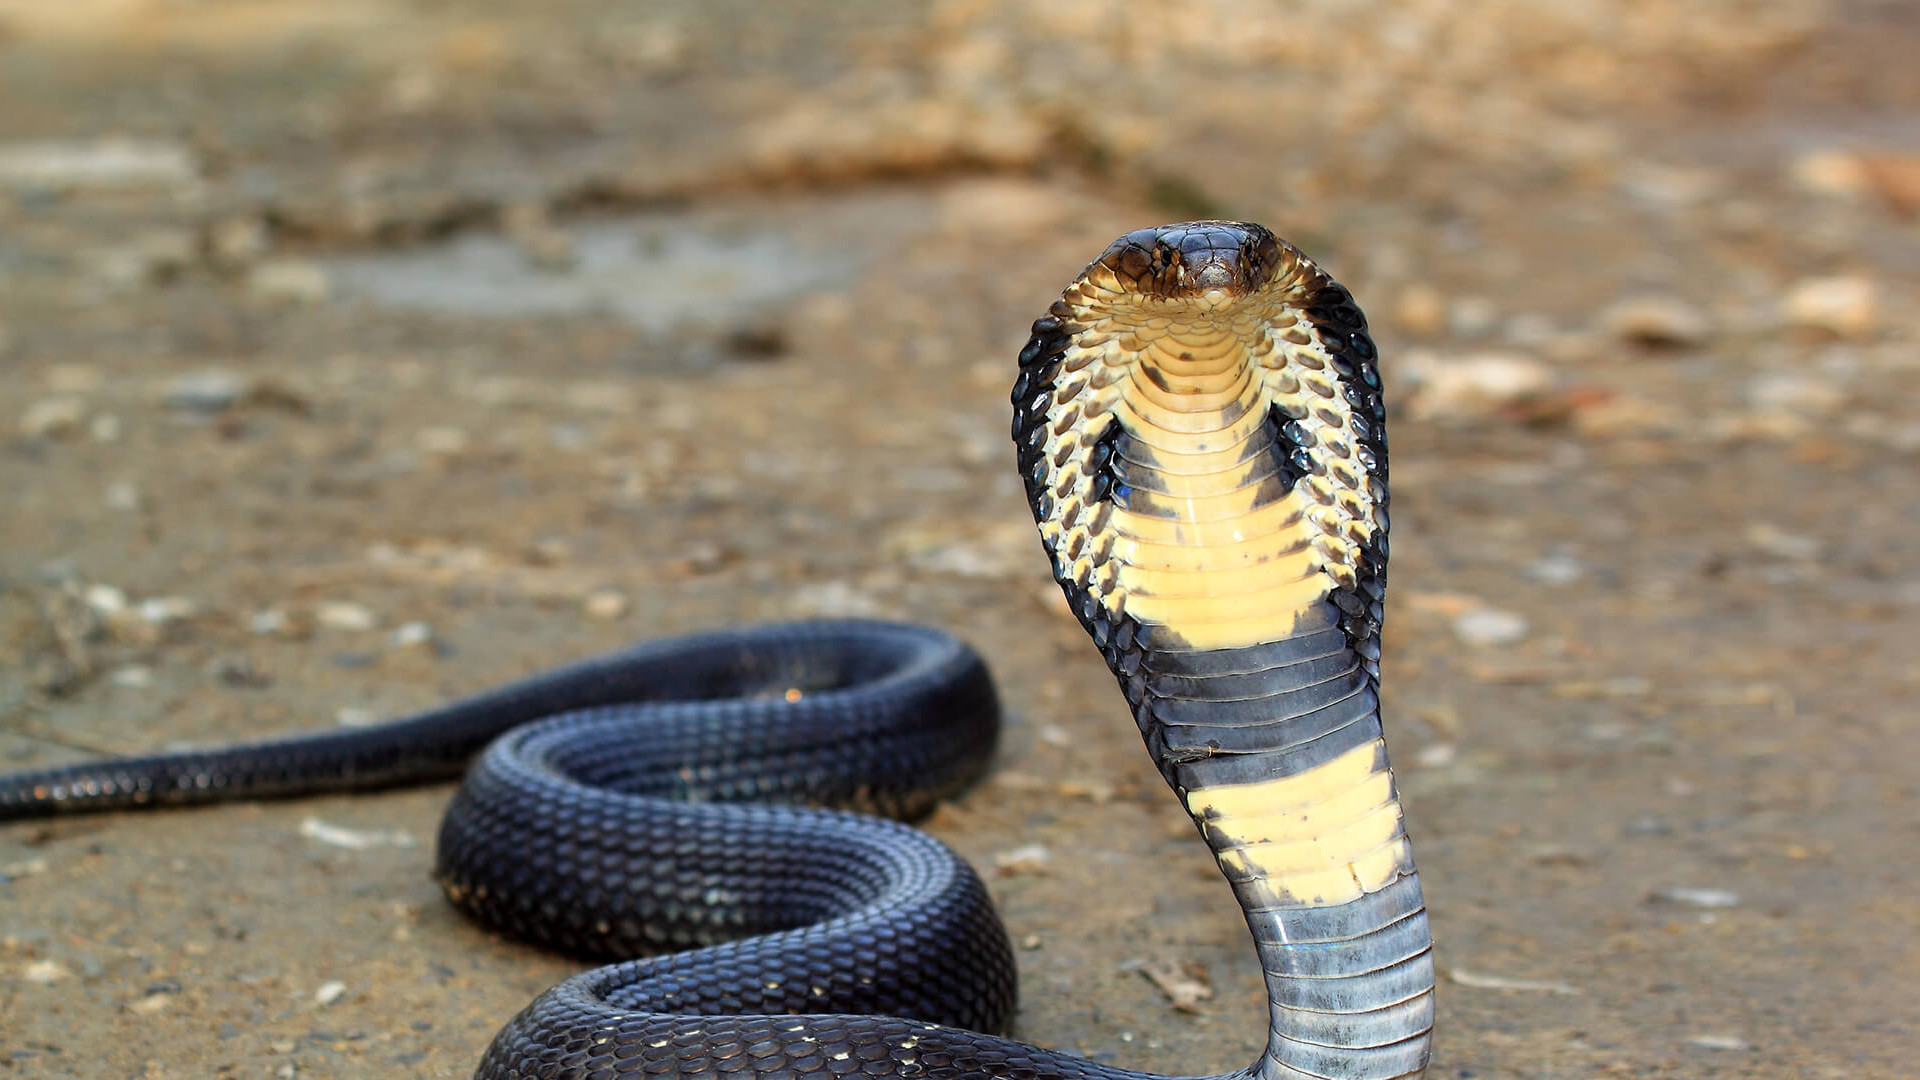 1920x1080 King cobra with head upright on brown dirt ground